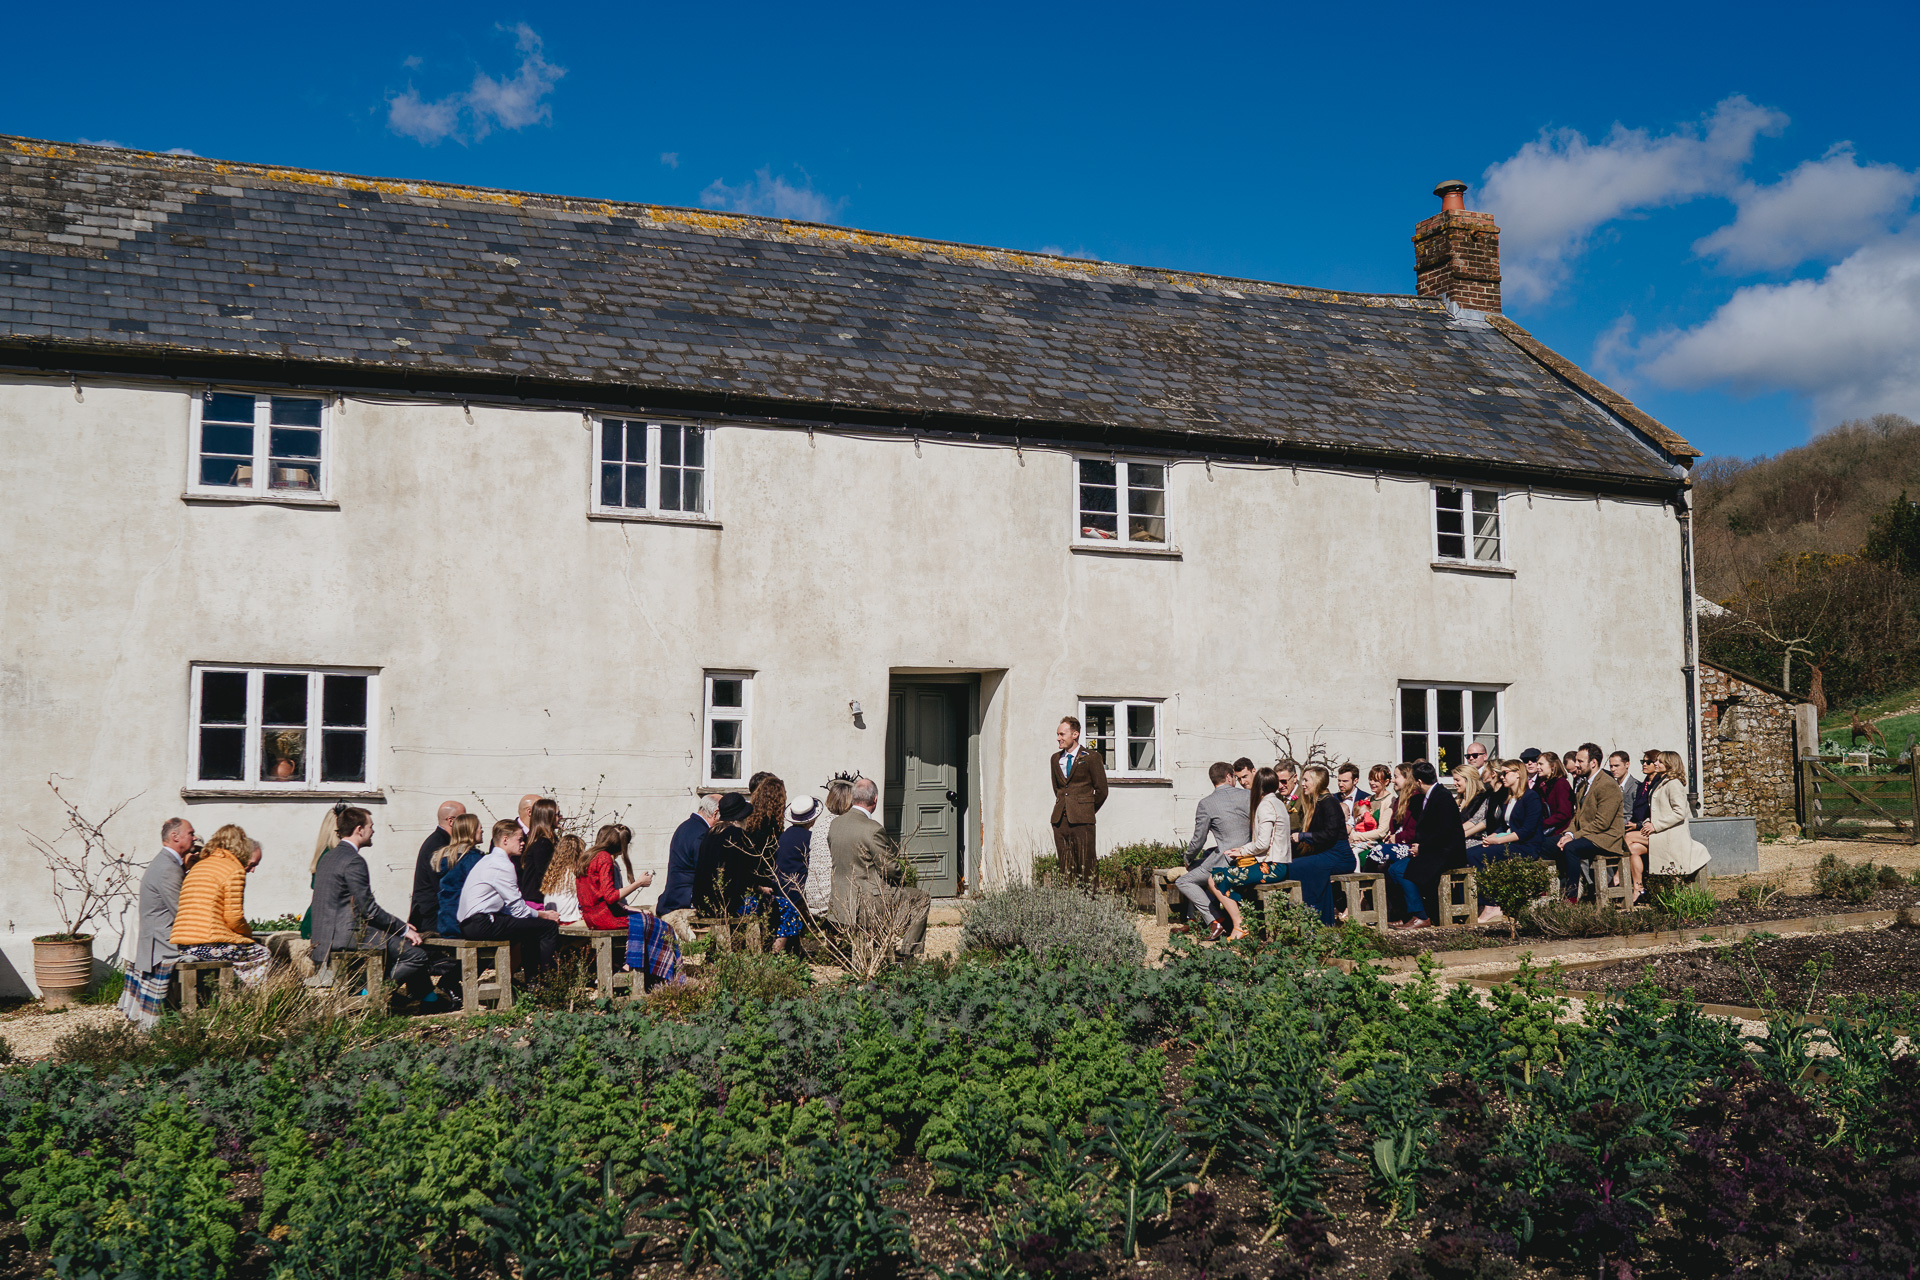 A groom standing outside River Cottage with wedding guests seated around him